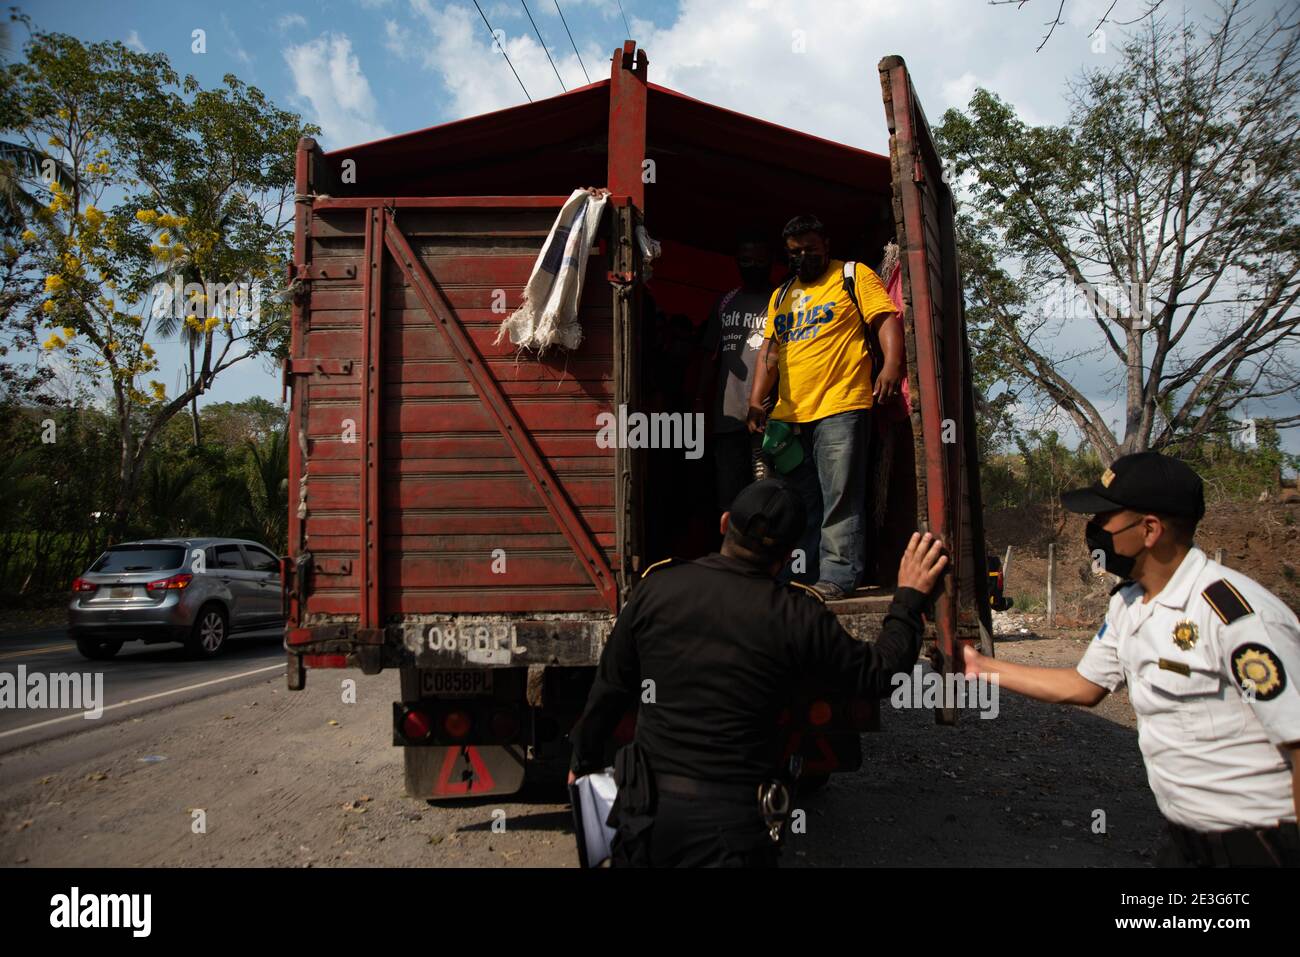 January 18, 2021: Moore than 35 inmigrants who are part of the Caravan, where detained by members of the Guatemalan army in the city of Coatepeque. This group where taken to a safe refugee on the frontier with México. Credit: Hector Adolfo Quintanar Perez/ZUMA Wire/Alamy Live News Stock Photo